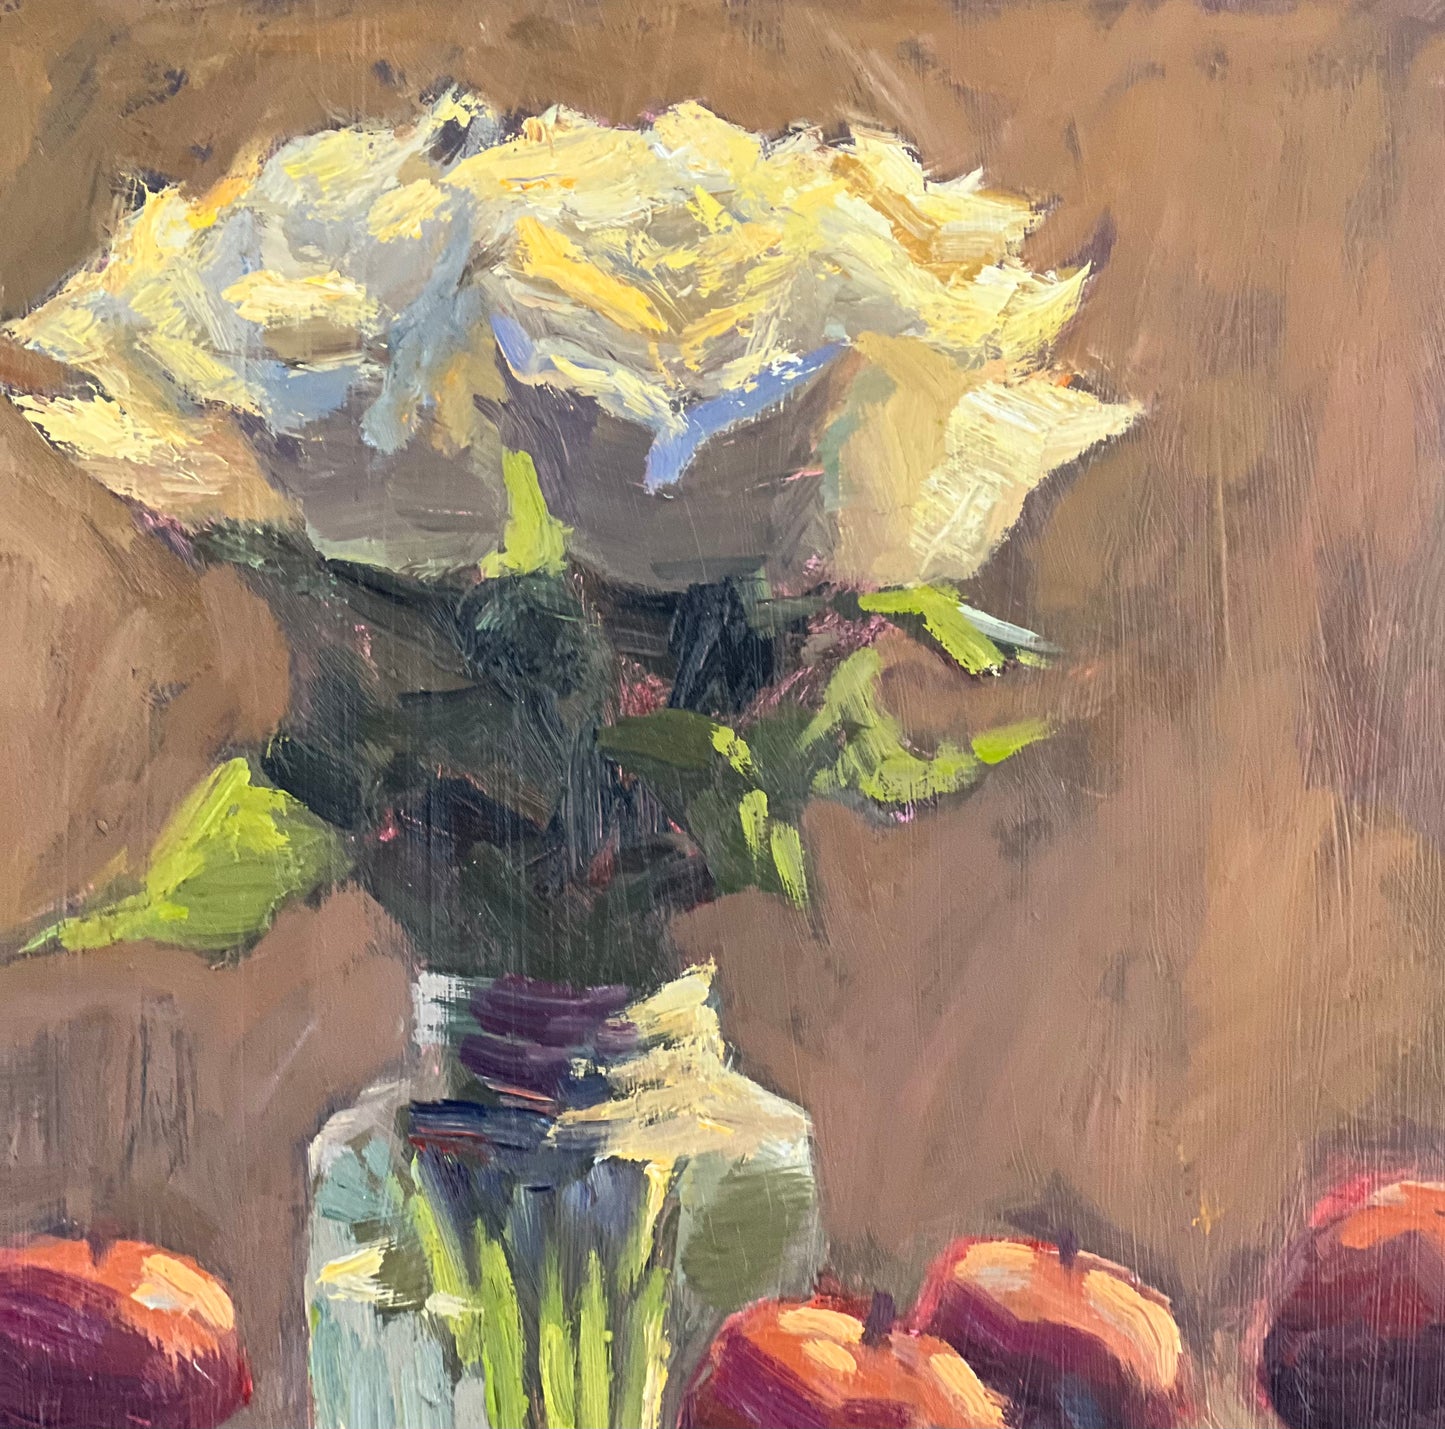 Oil Painting of Roses - Backlit roses and plums